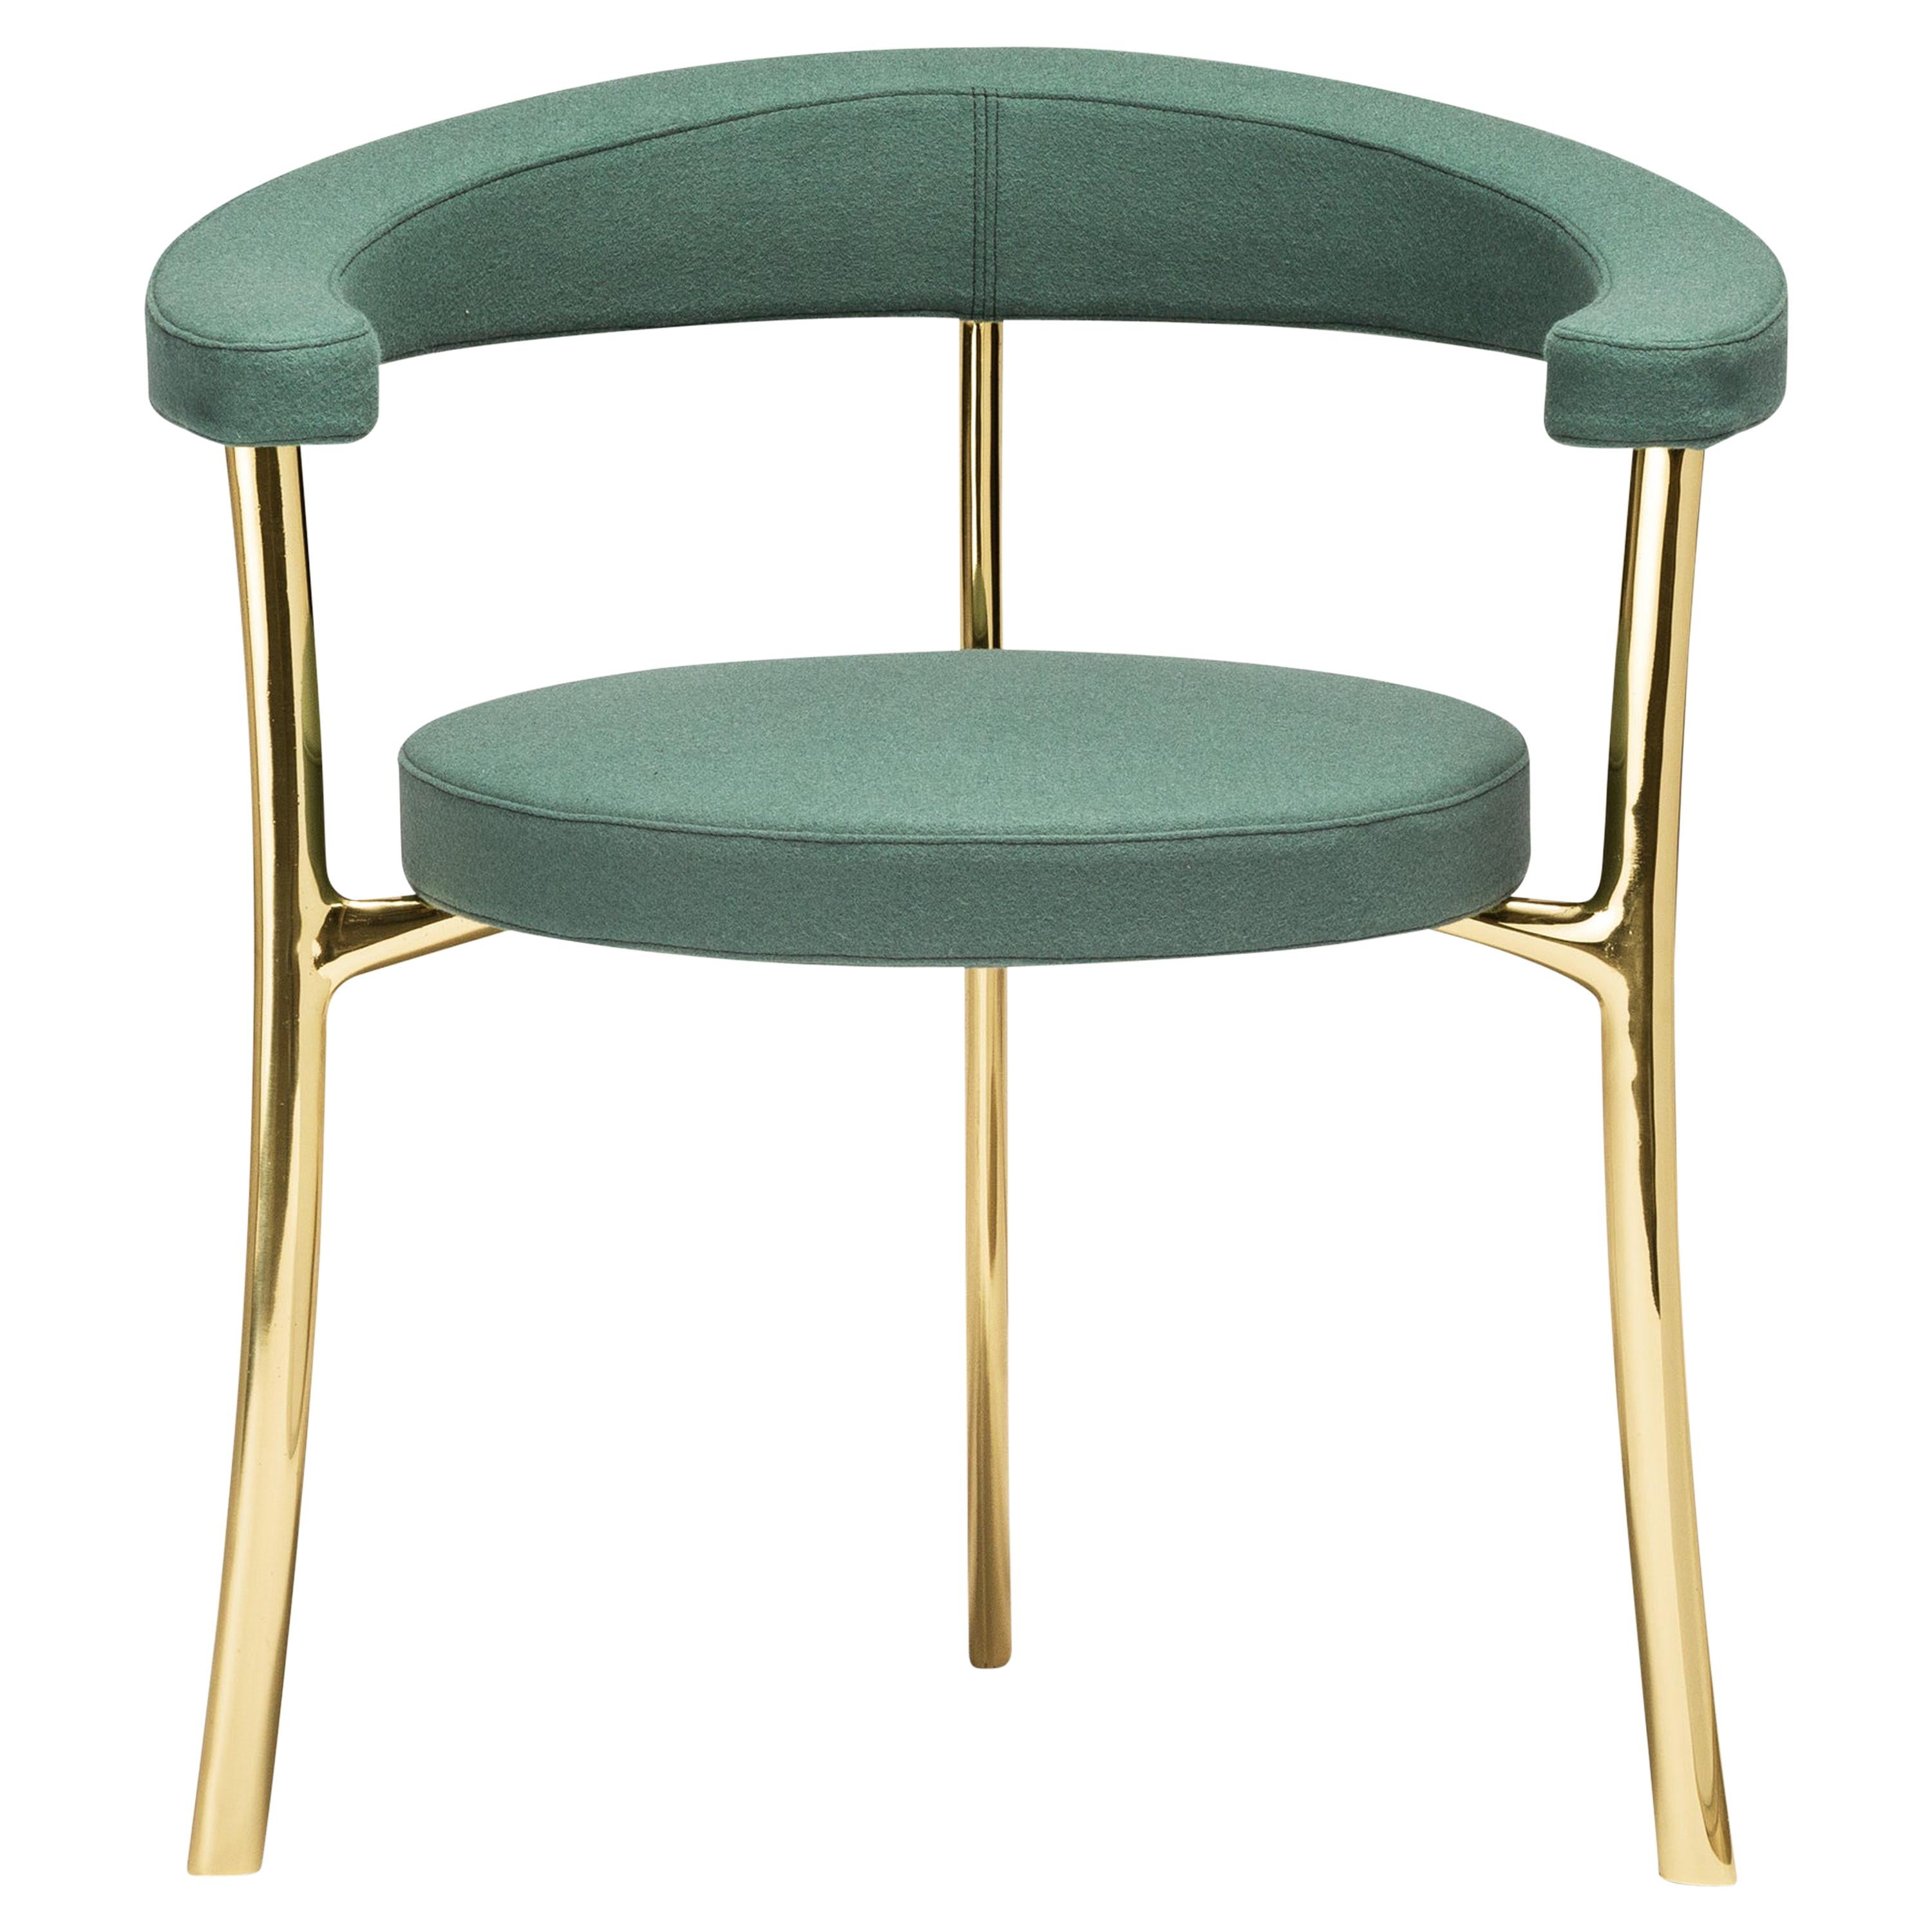 Ghidini1961 Katana Armchair in Fabric with Polished Brass Legs by Paolo Rizzatto